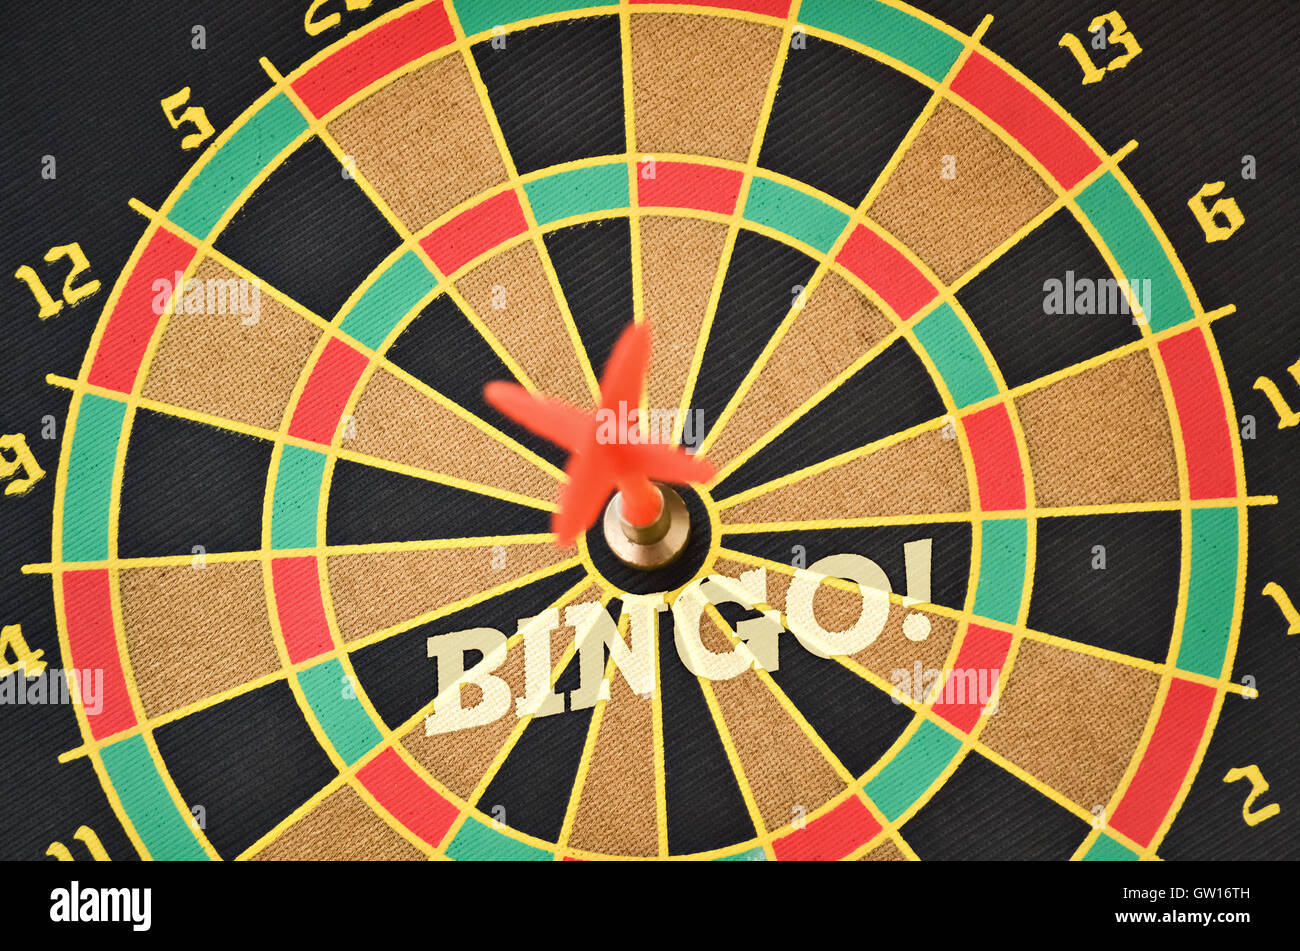 Word Bingo written on the circular target with a plastic feather in the center Stock Photo